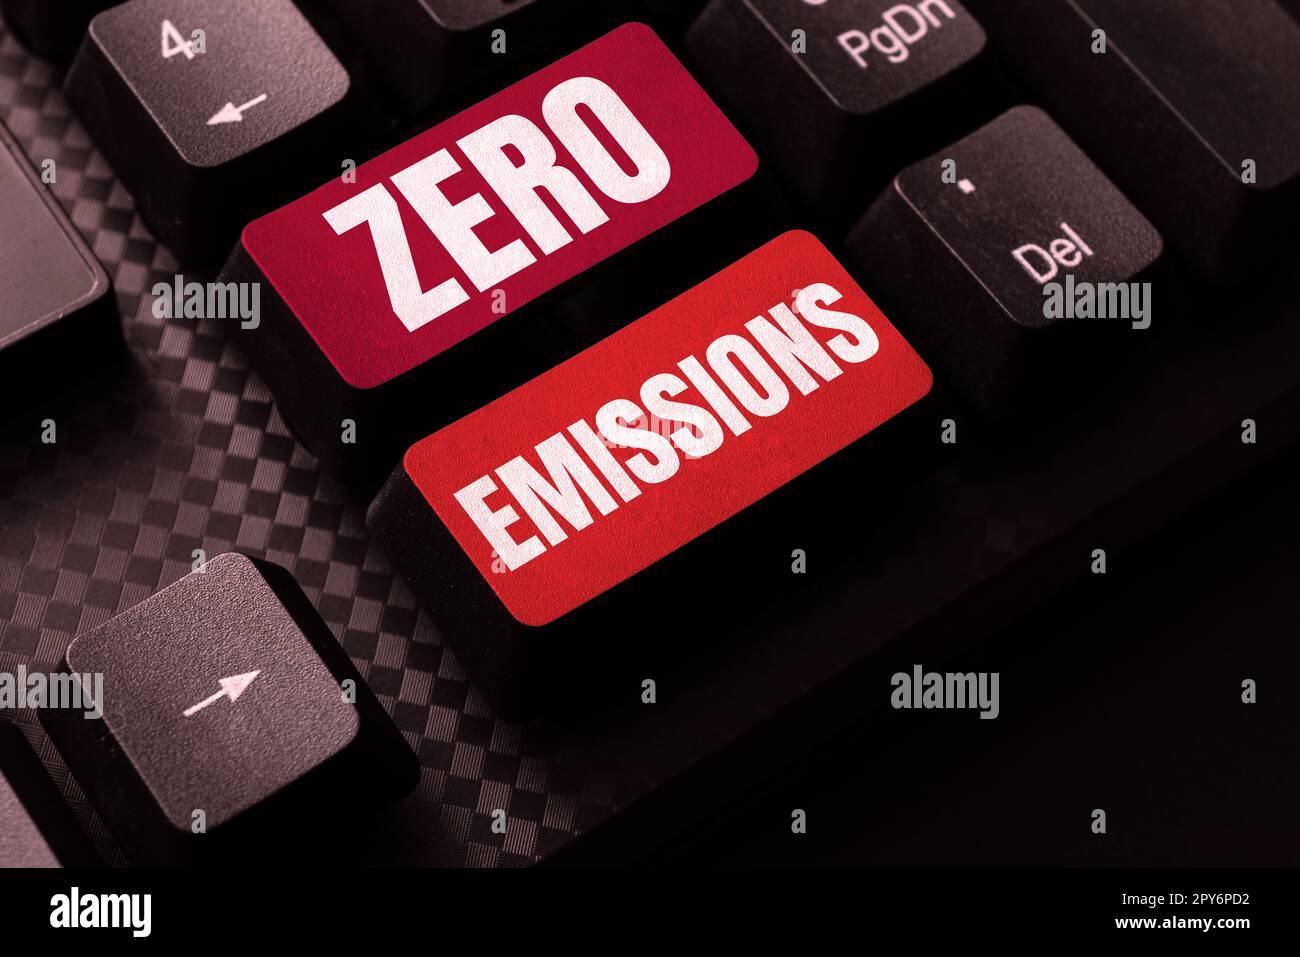 Text showing inspiration Zero Emissions. Word for emits no waste products that pollute the environment Stock Photo